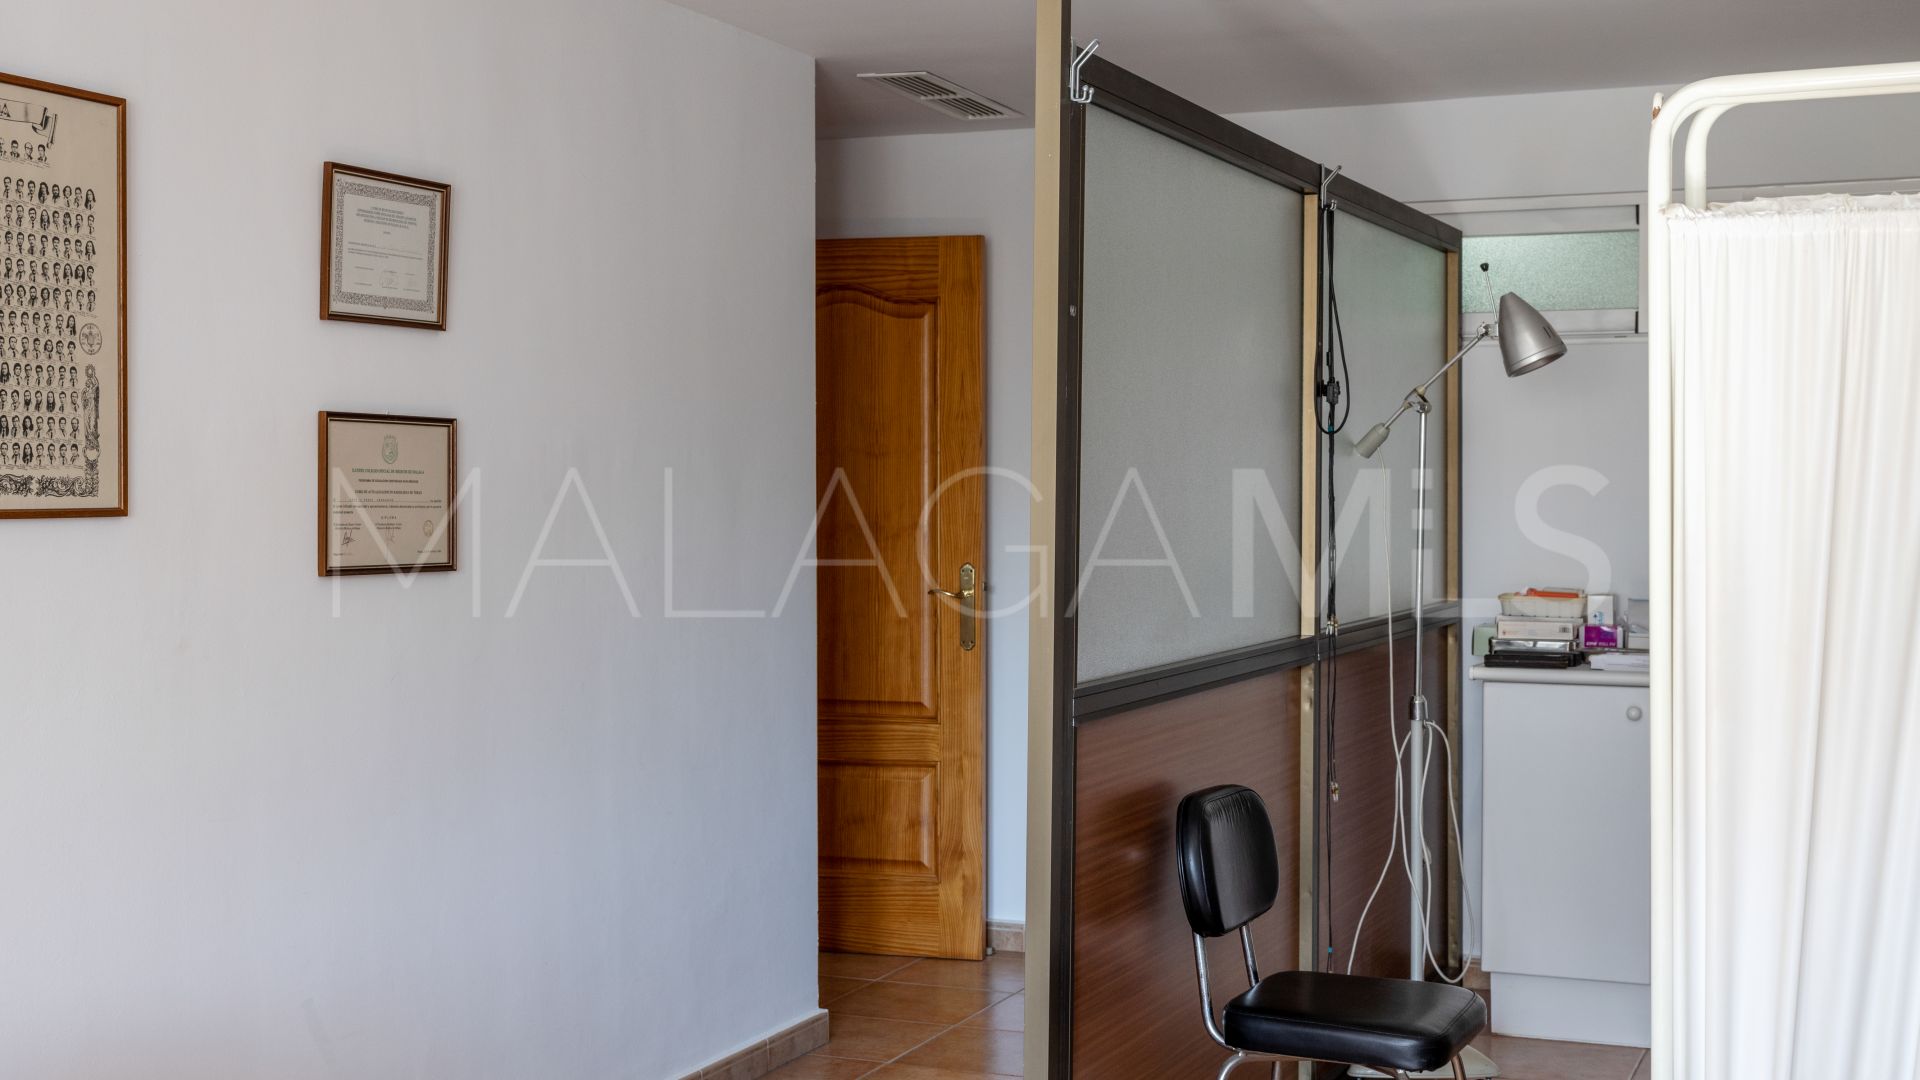 For sale apartment in Fuengirola Centro with 5 bedrooms